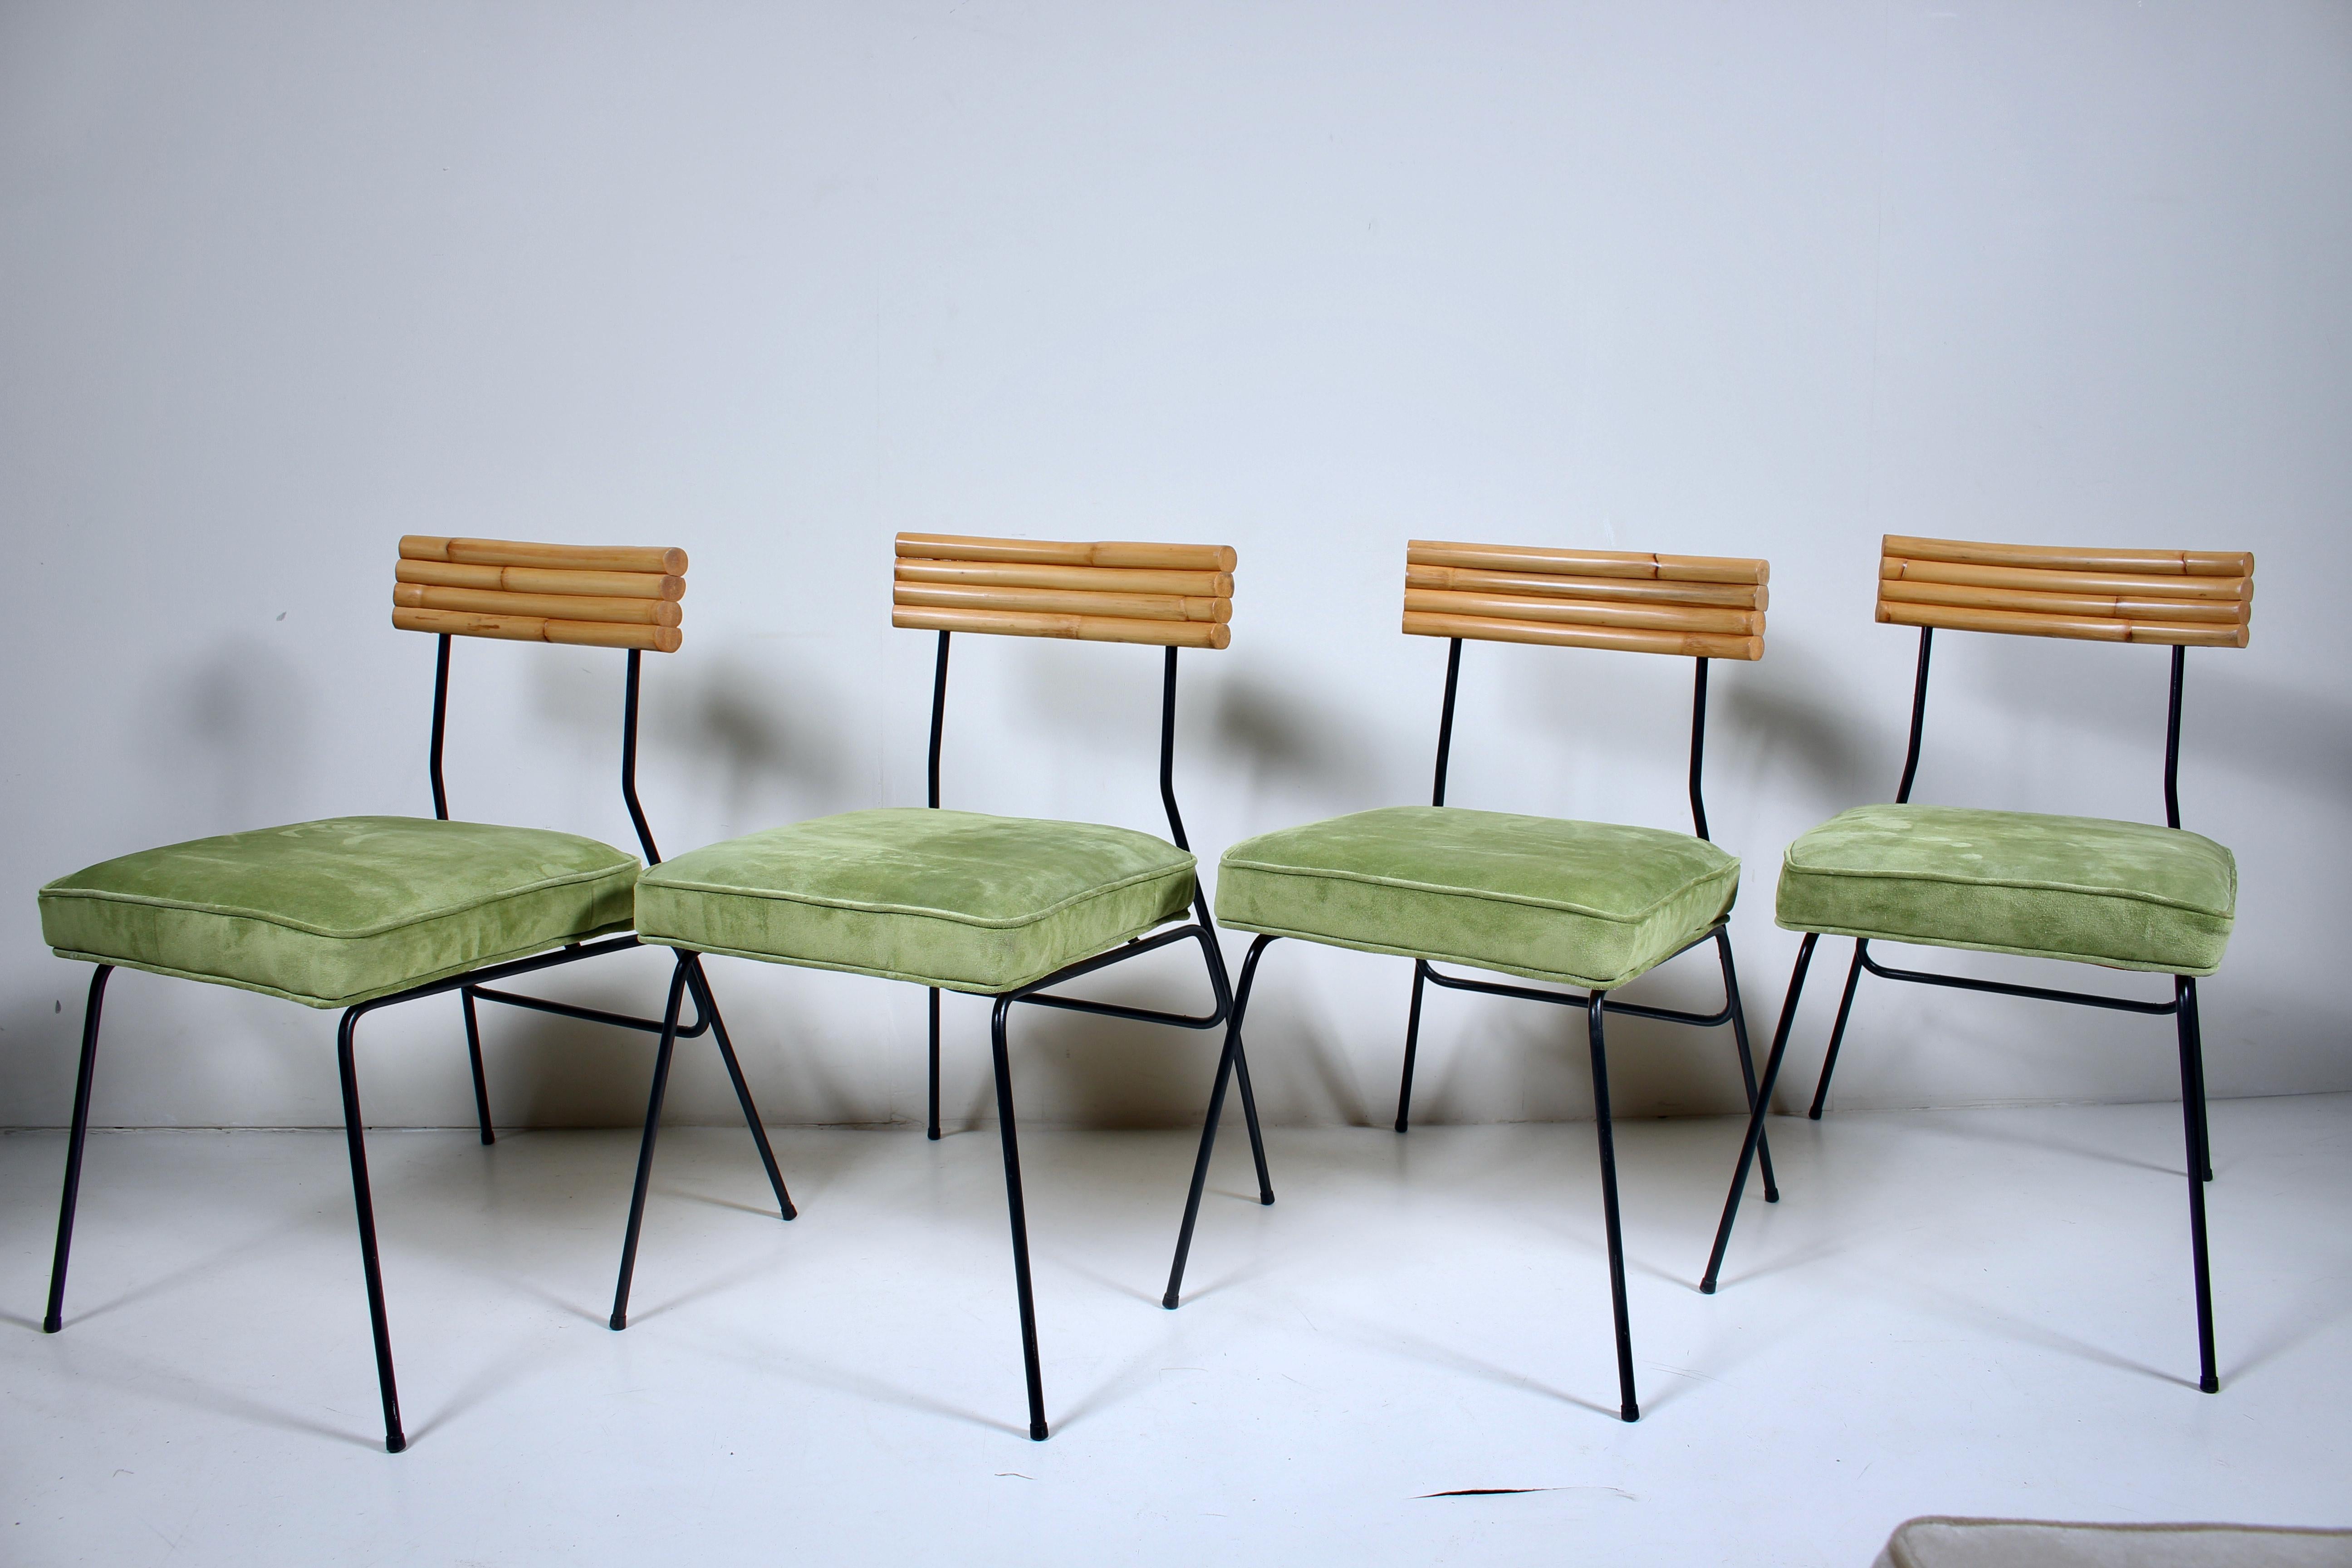 Enameled Set of 4 Herb & Shirley Ritts Iron, Bamboo & Suede Dining Side Chairs, 1950s For Sale